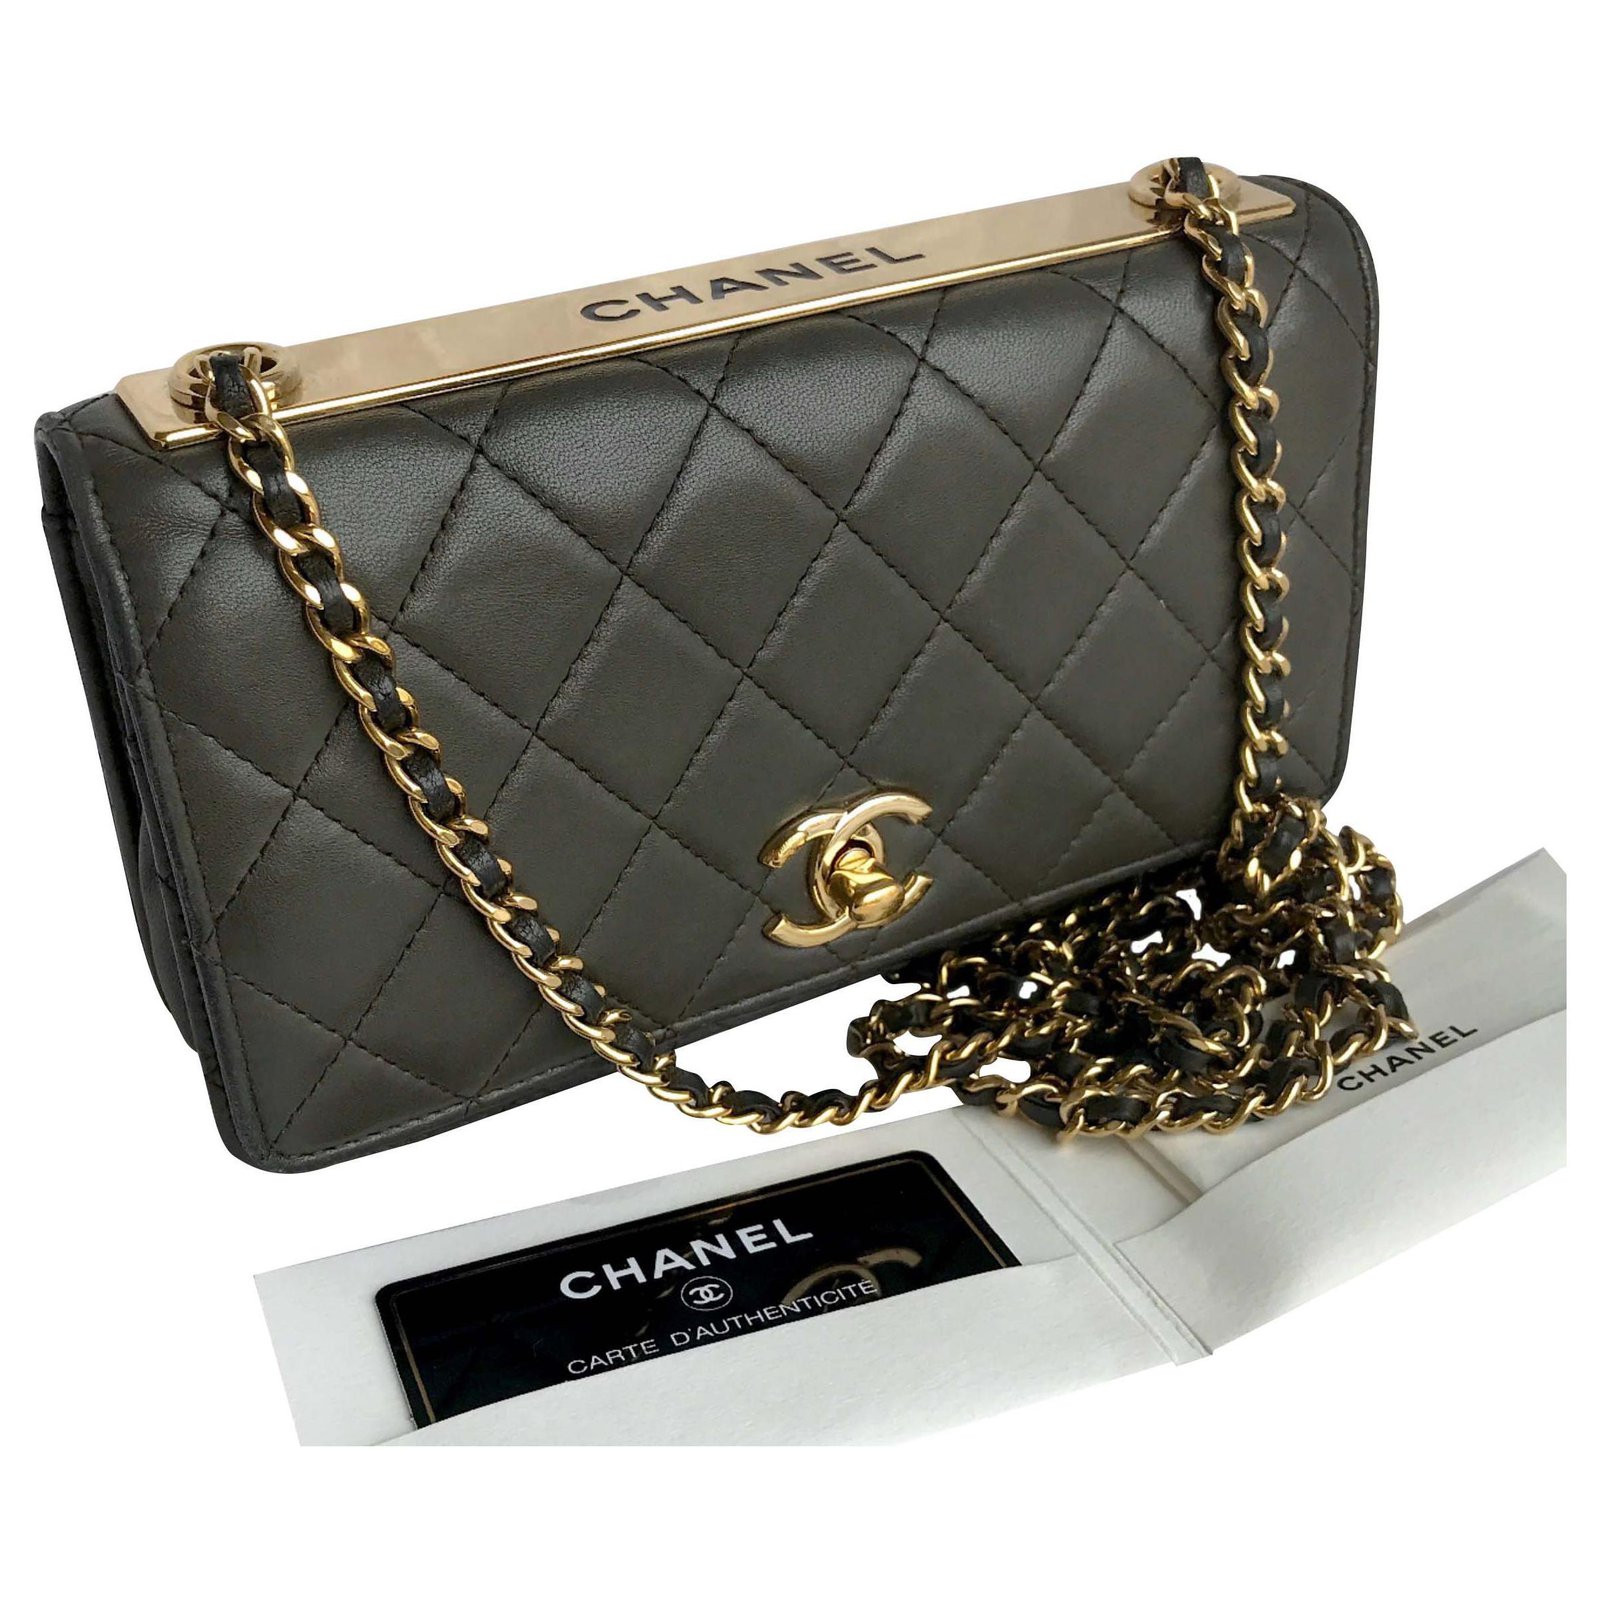 Wallet On Chain Chanel With box, card Trendy WOC Flap Bag Green Khaki